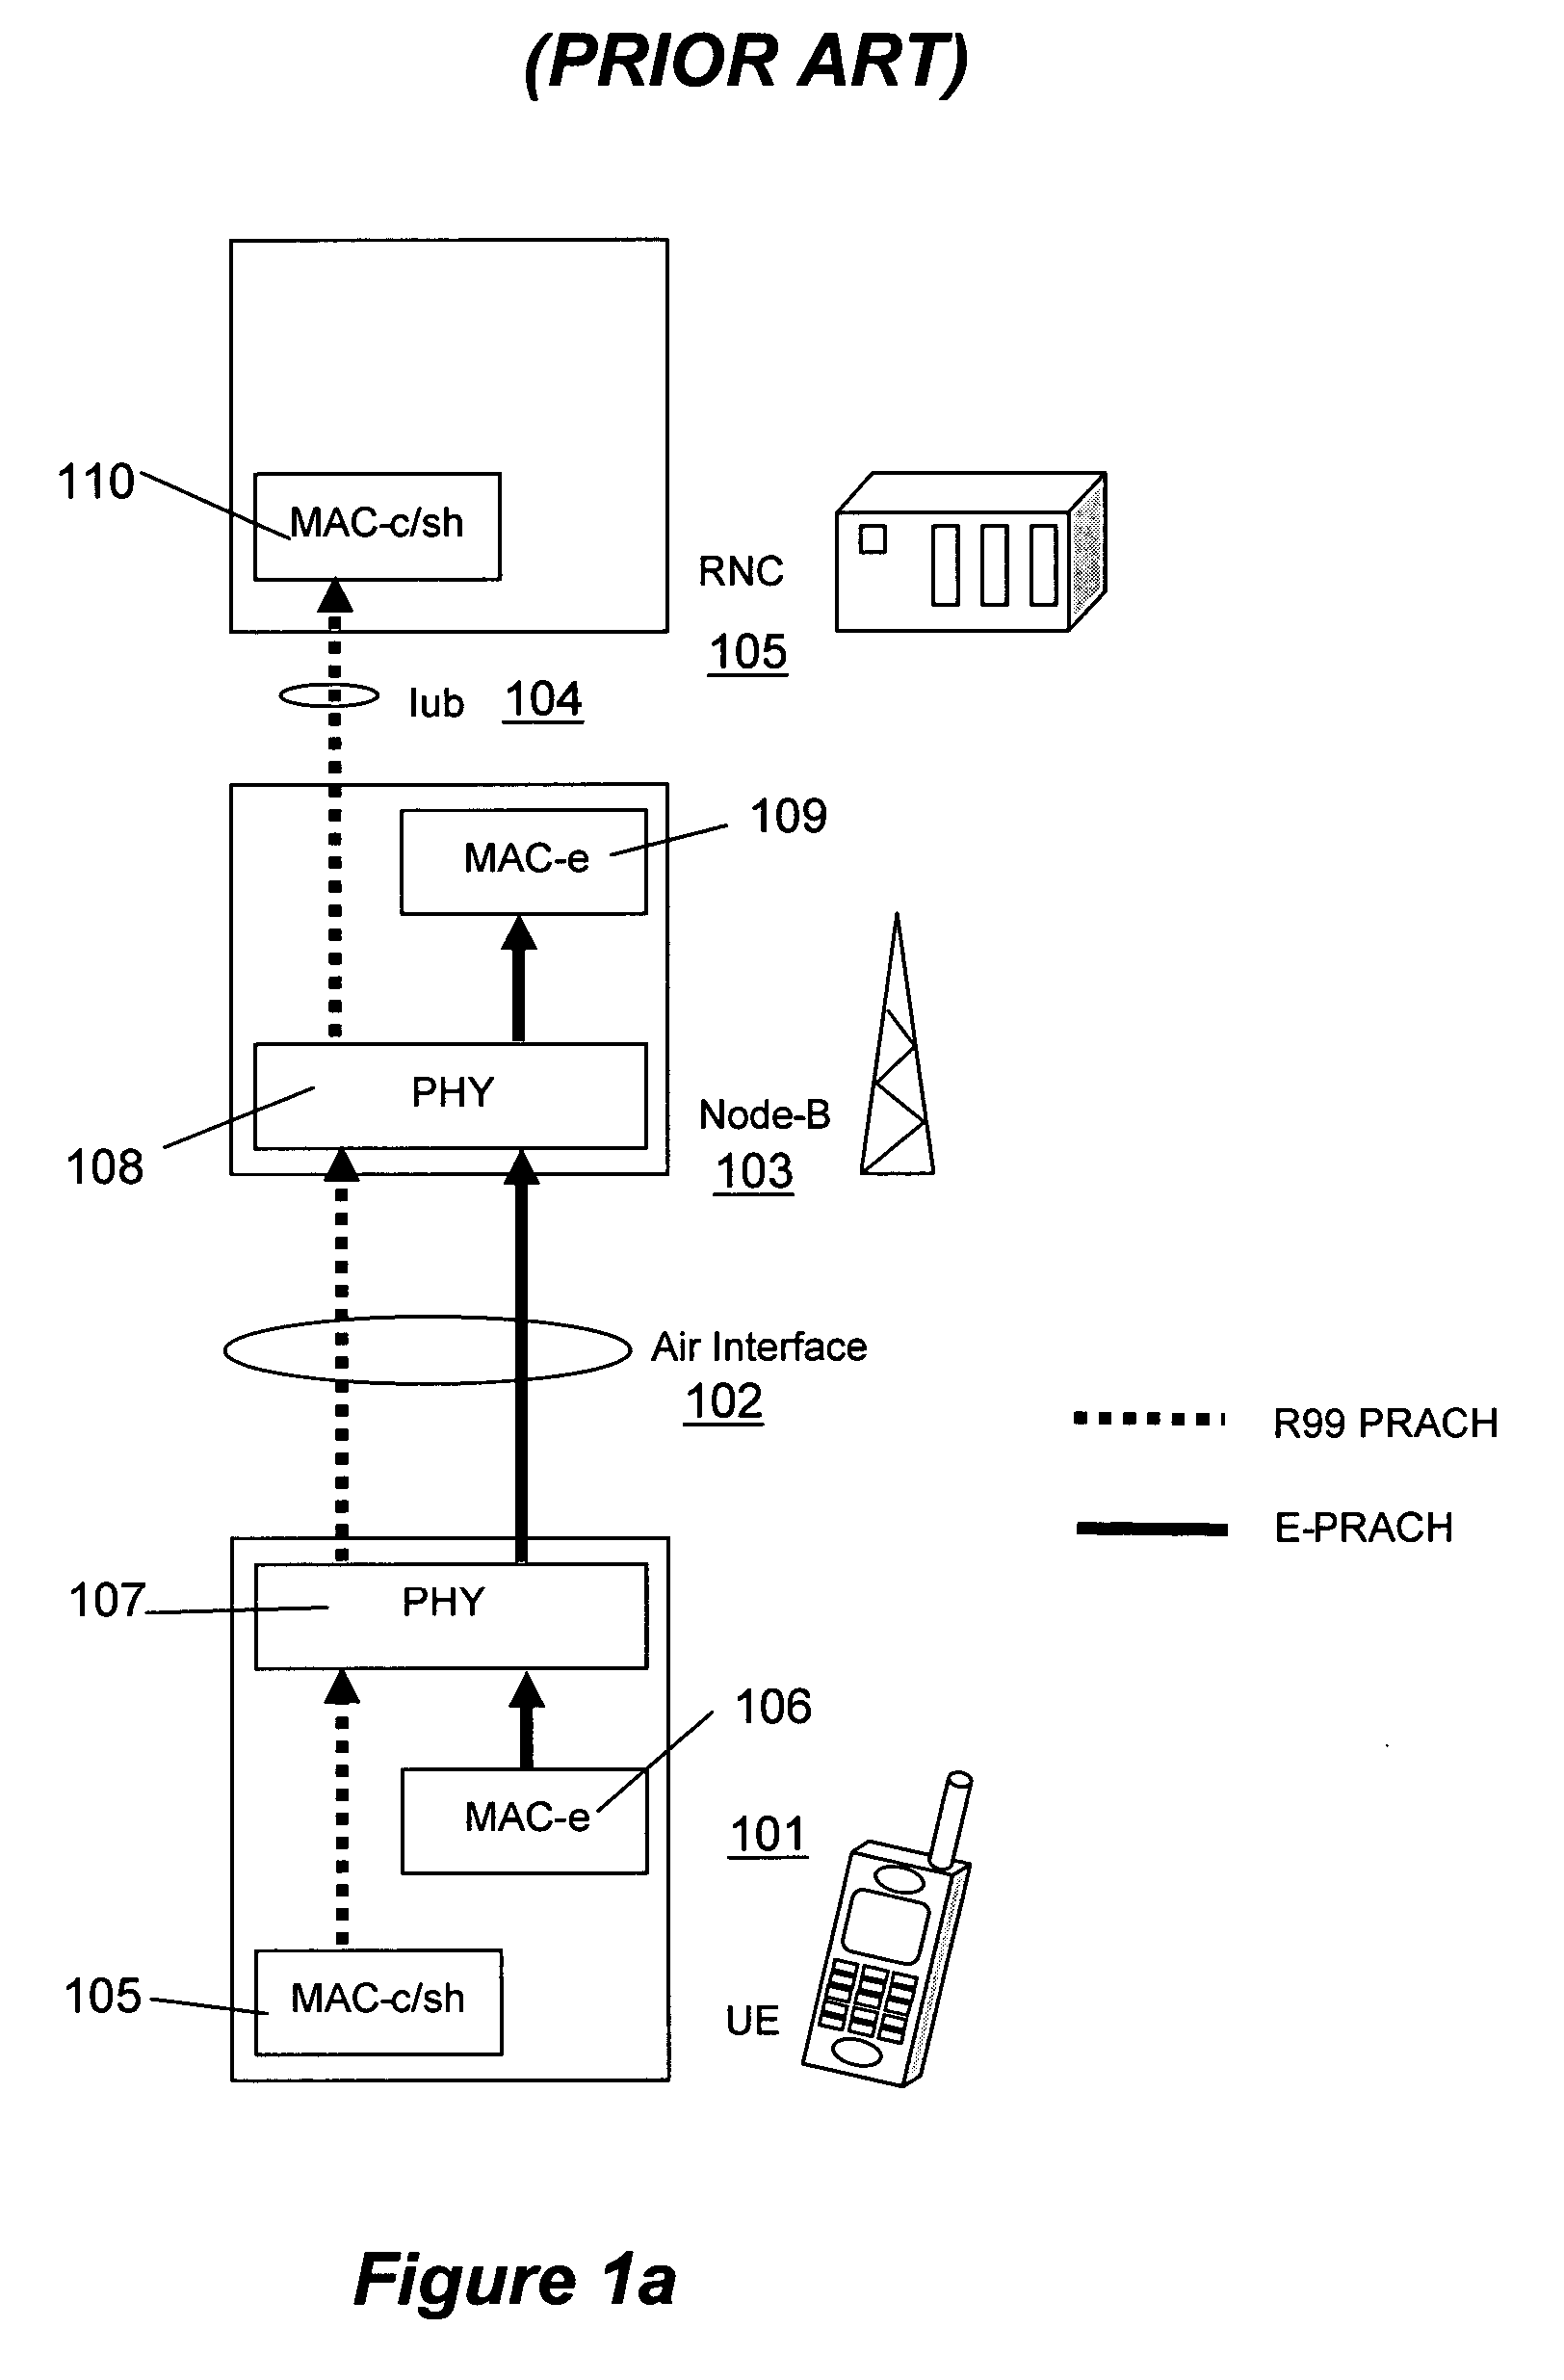 Data packet type recognition system